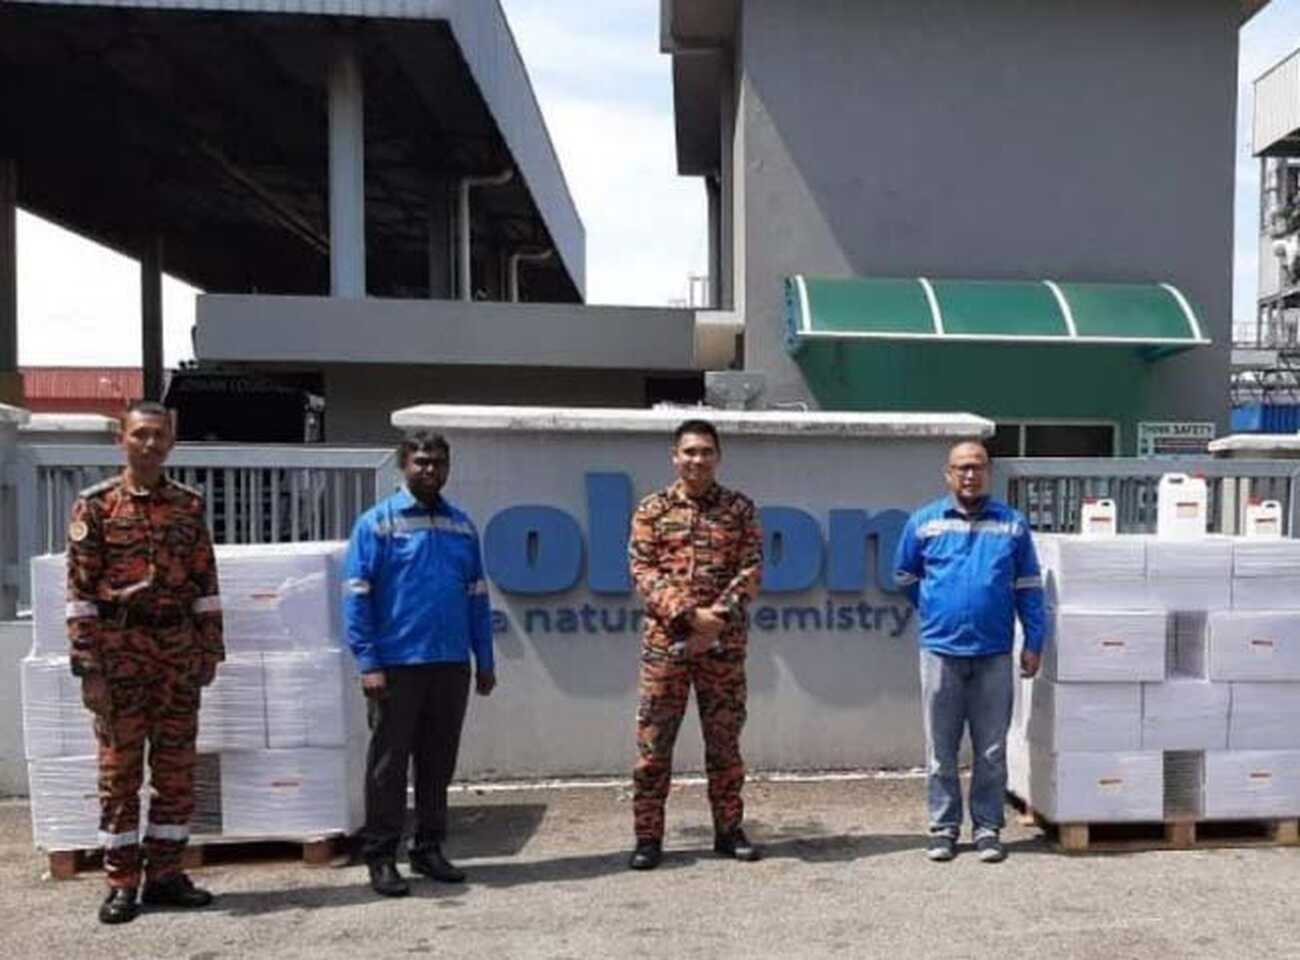 6.500 liter of hand sanitizer distributed to Malaysian healthcare organizations